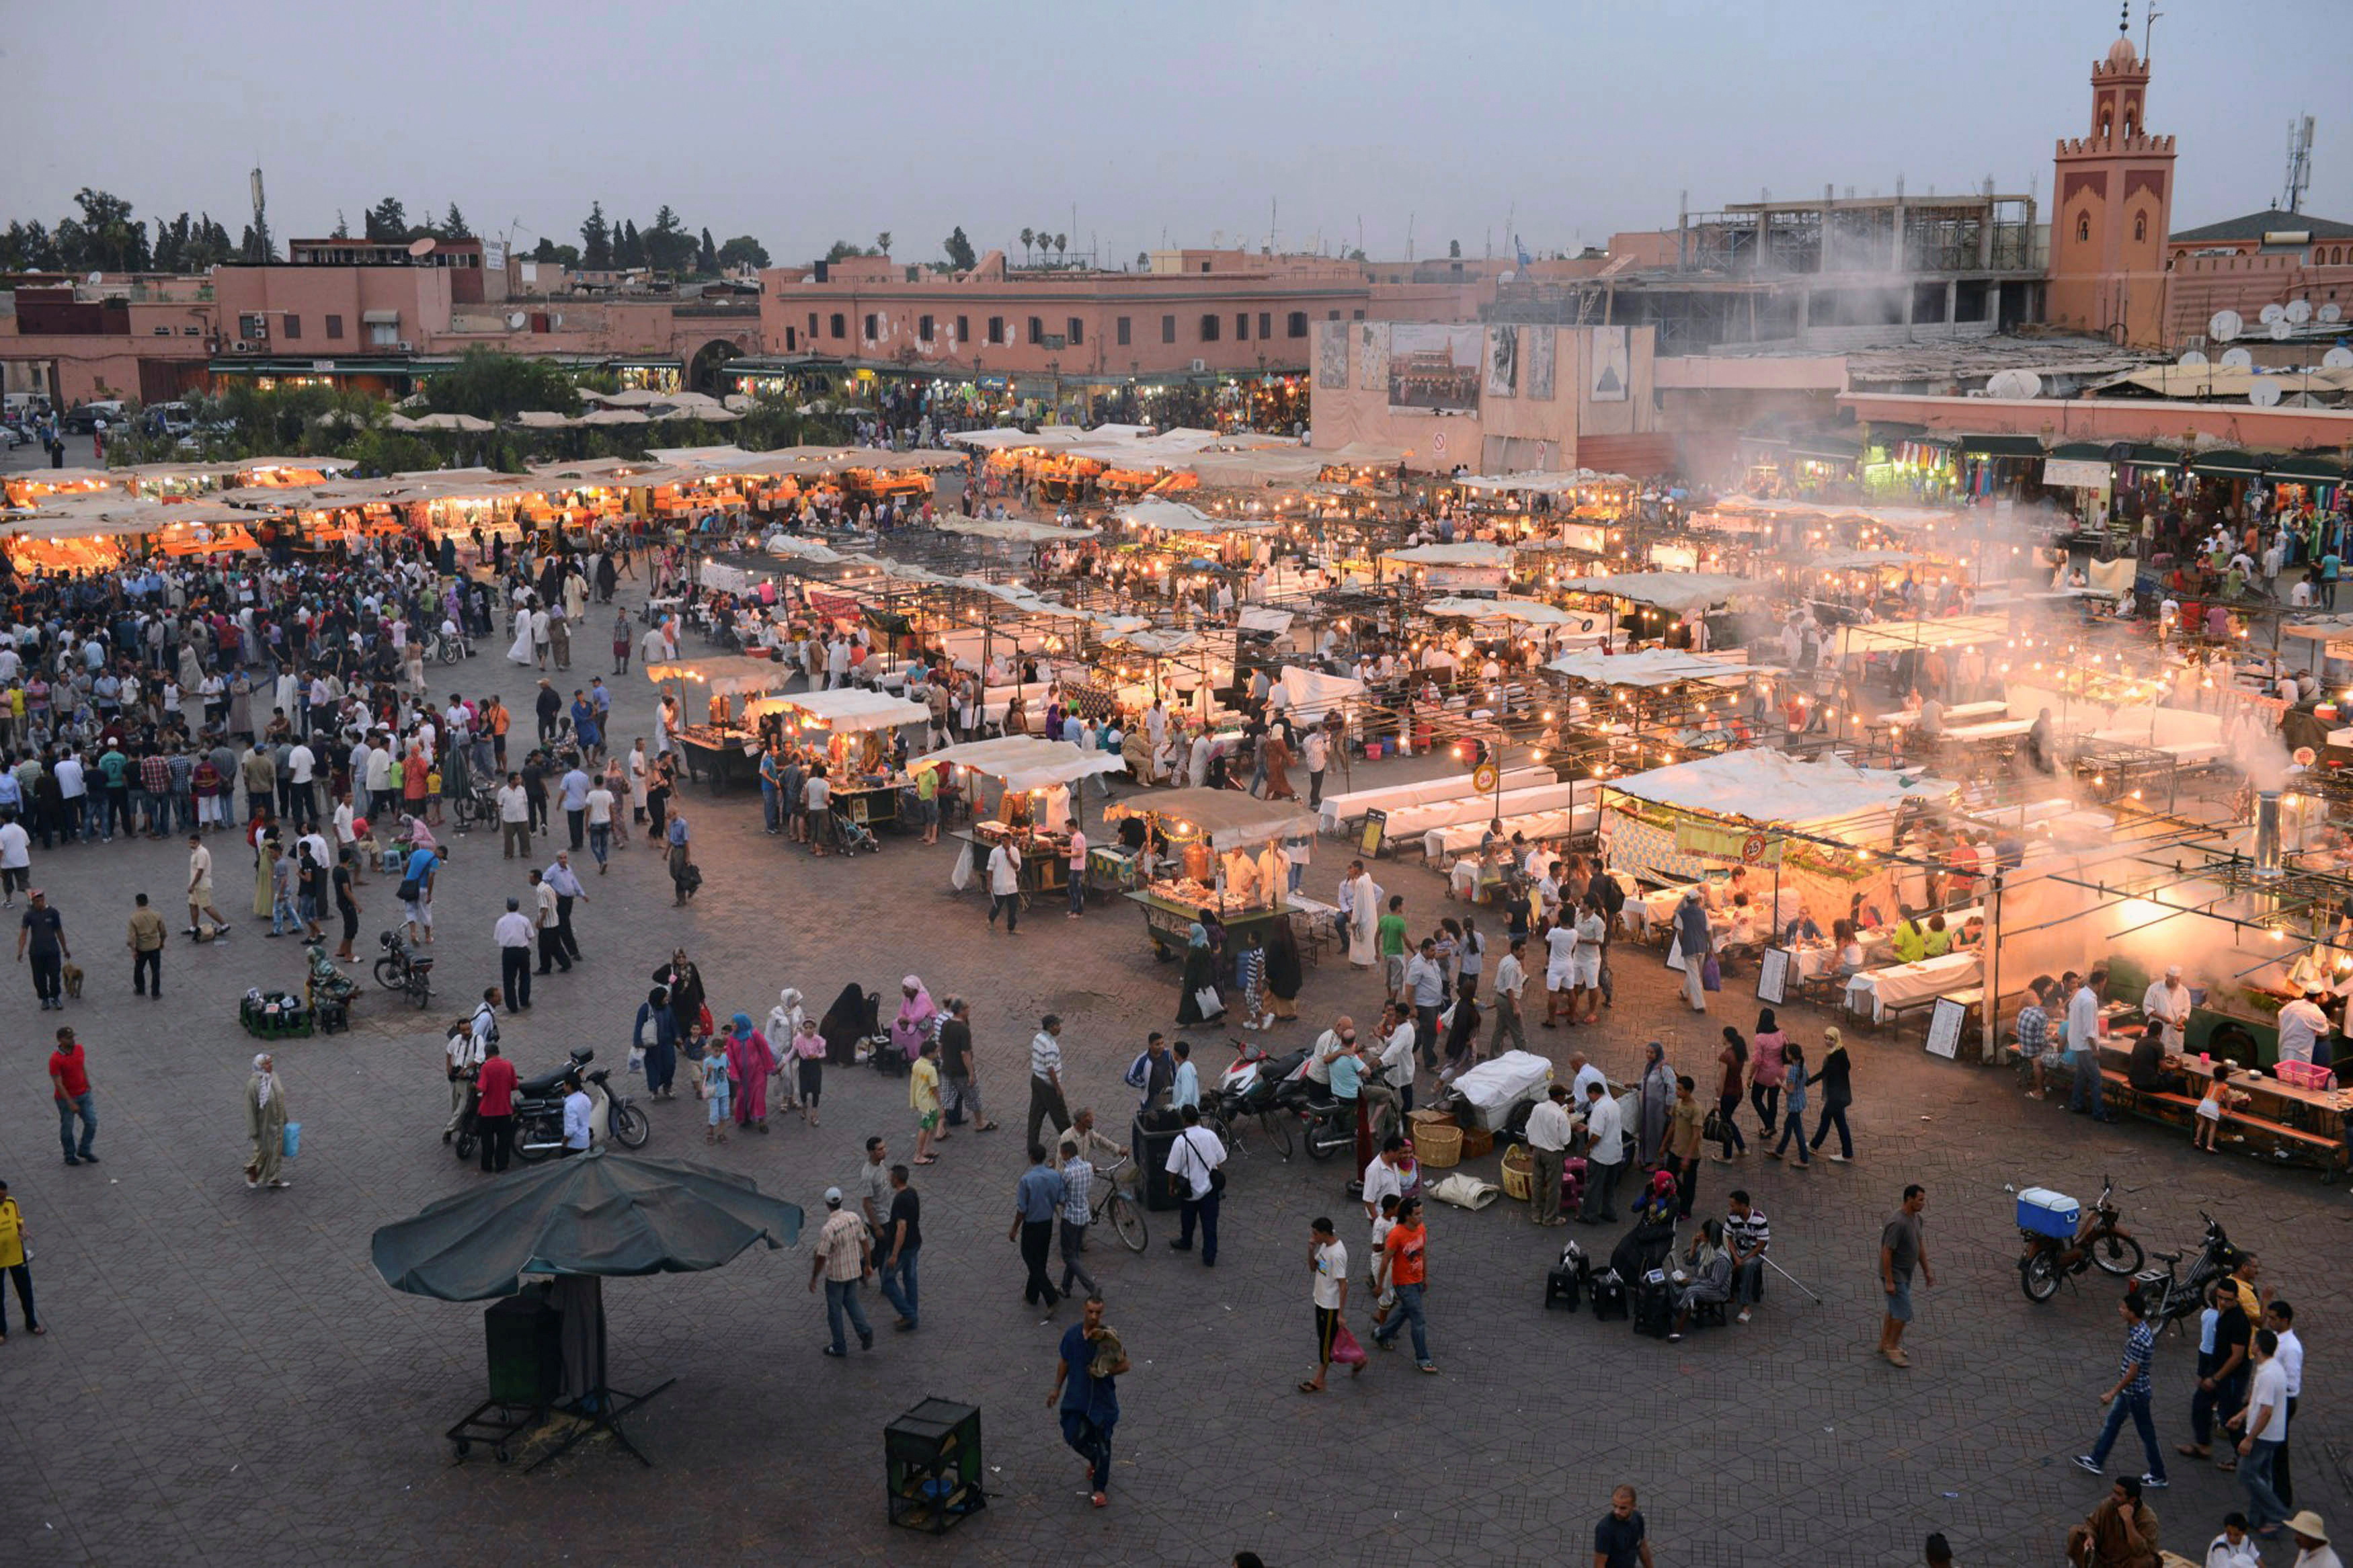 A general view of Marrakesh's famous Jemma el-Fnaa square